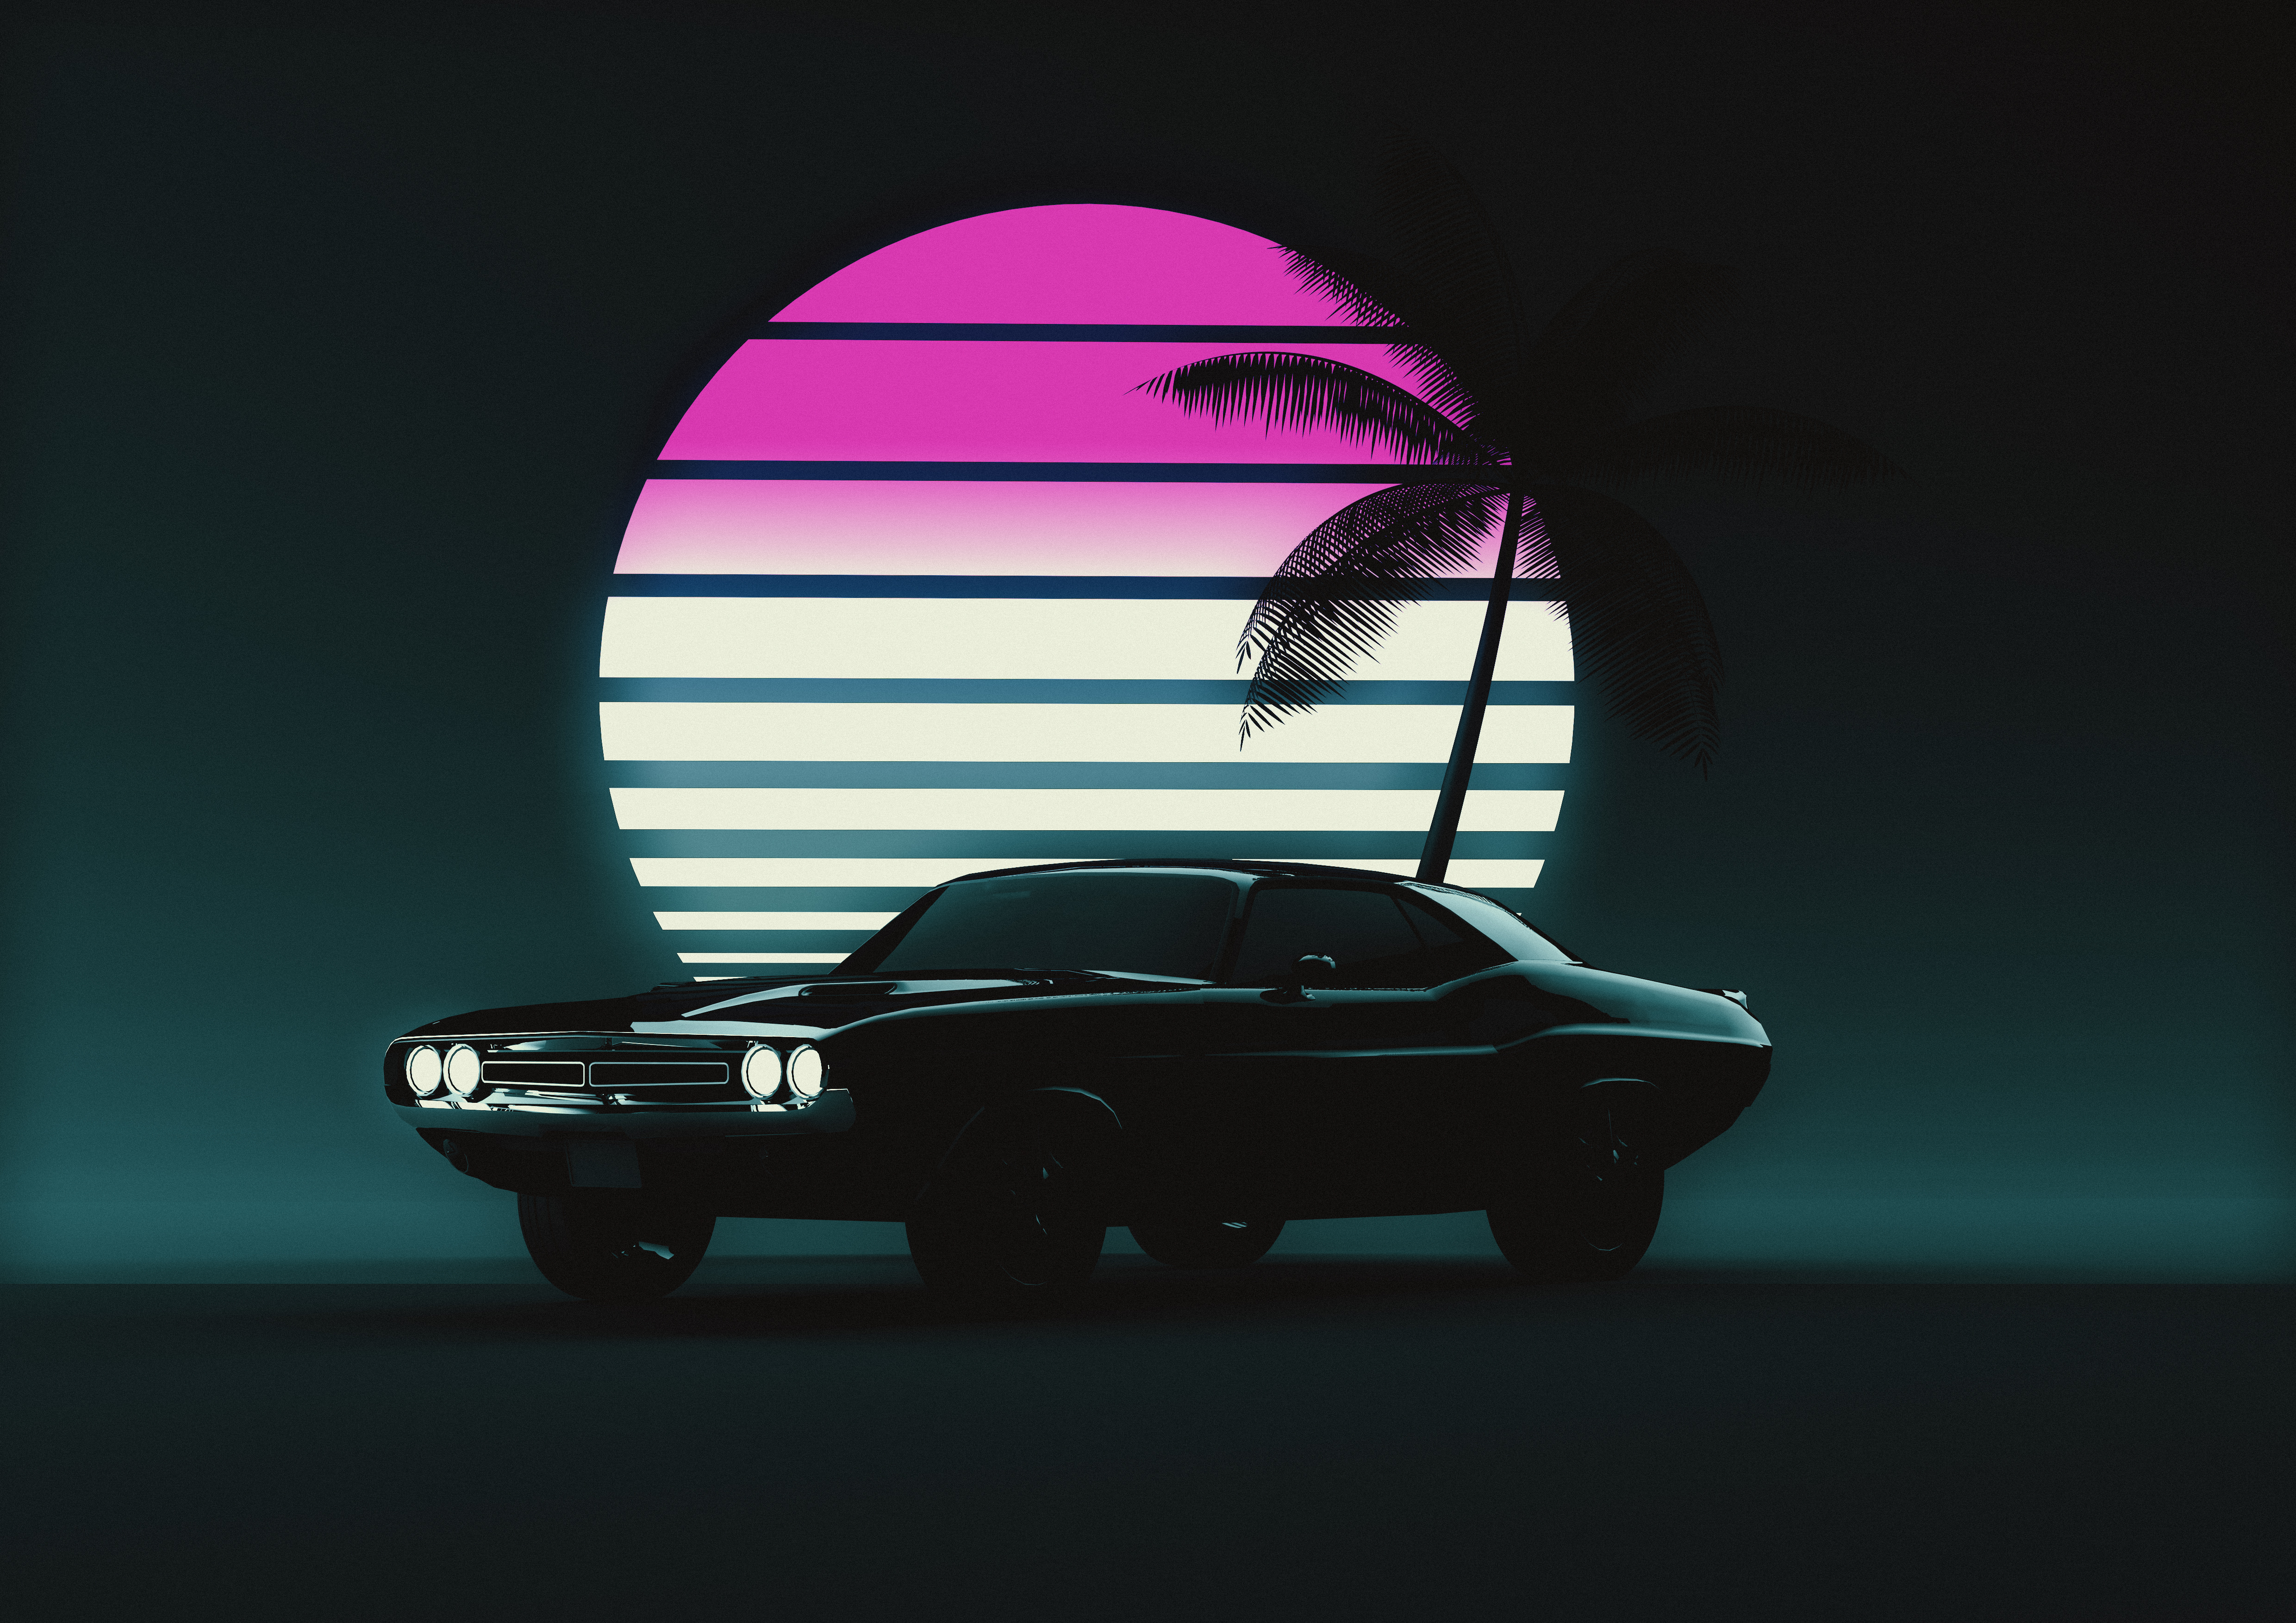 Neon Supercars Wallpapers on WallpaperDog